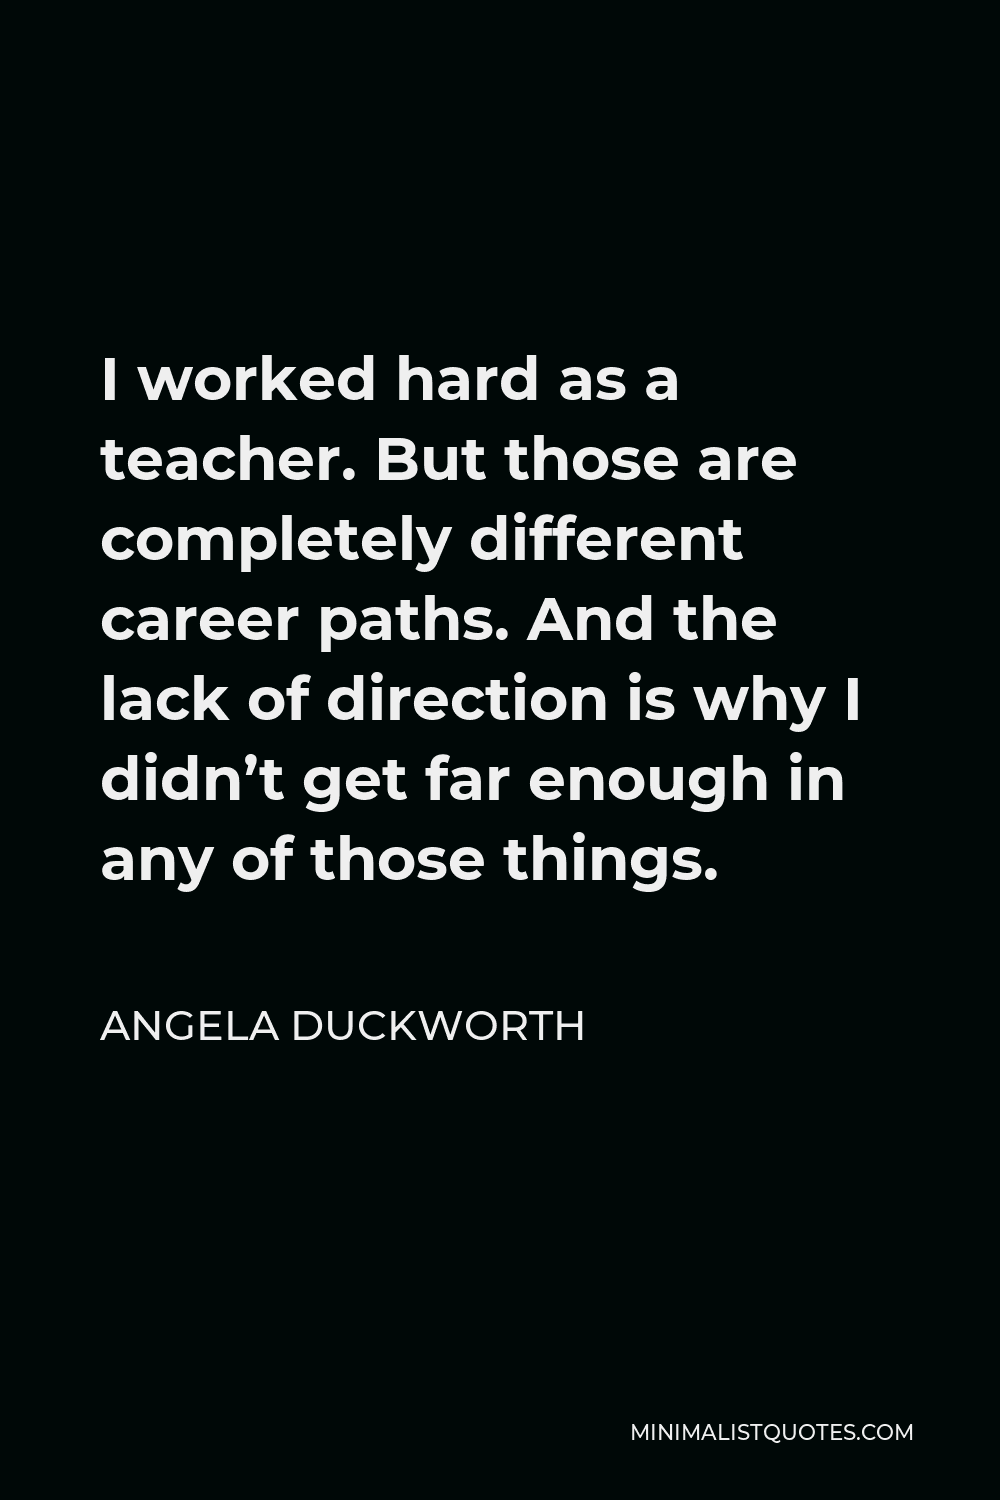 Angela Duckworth Quote - I worked hard as a teacher. But those are completely different career paths. And the lack of direction is why I didn’t get far enough in any of those things.